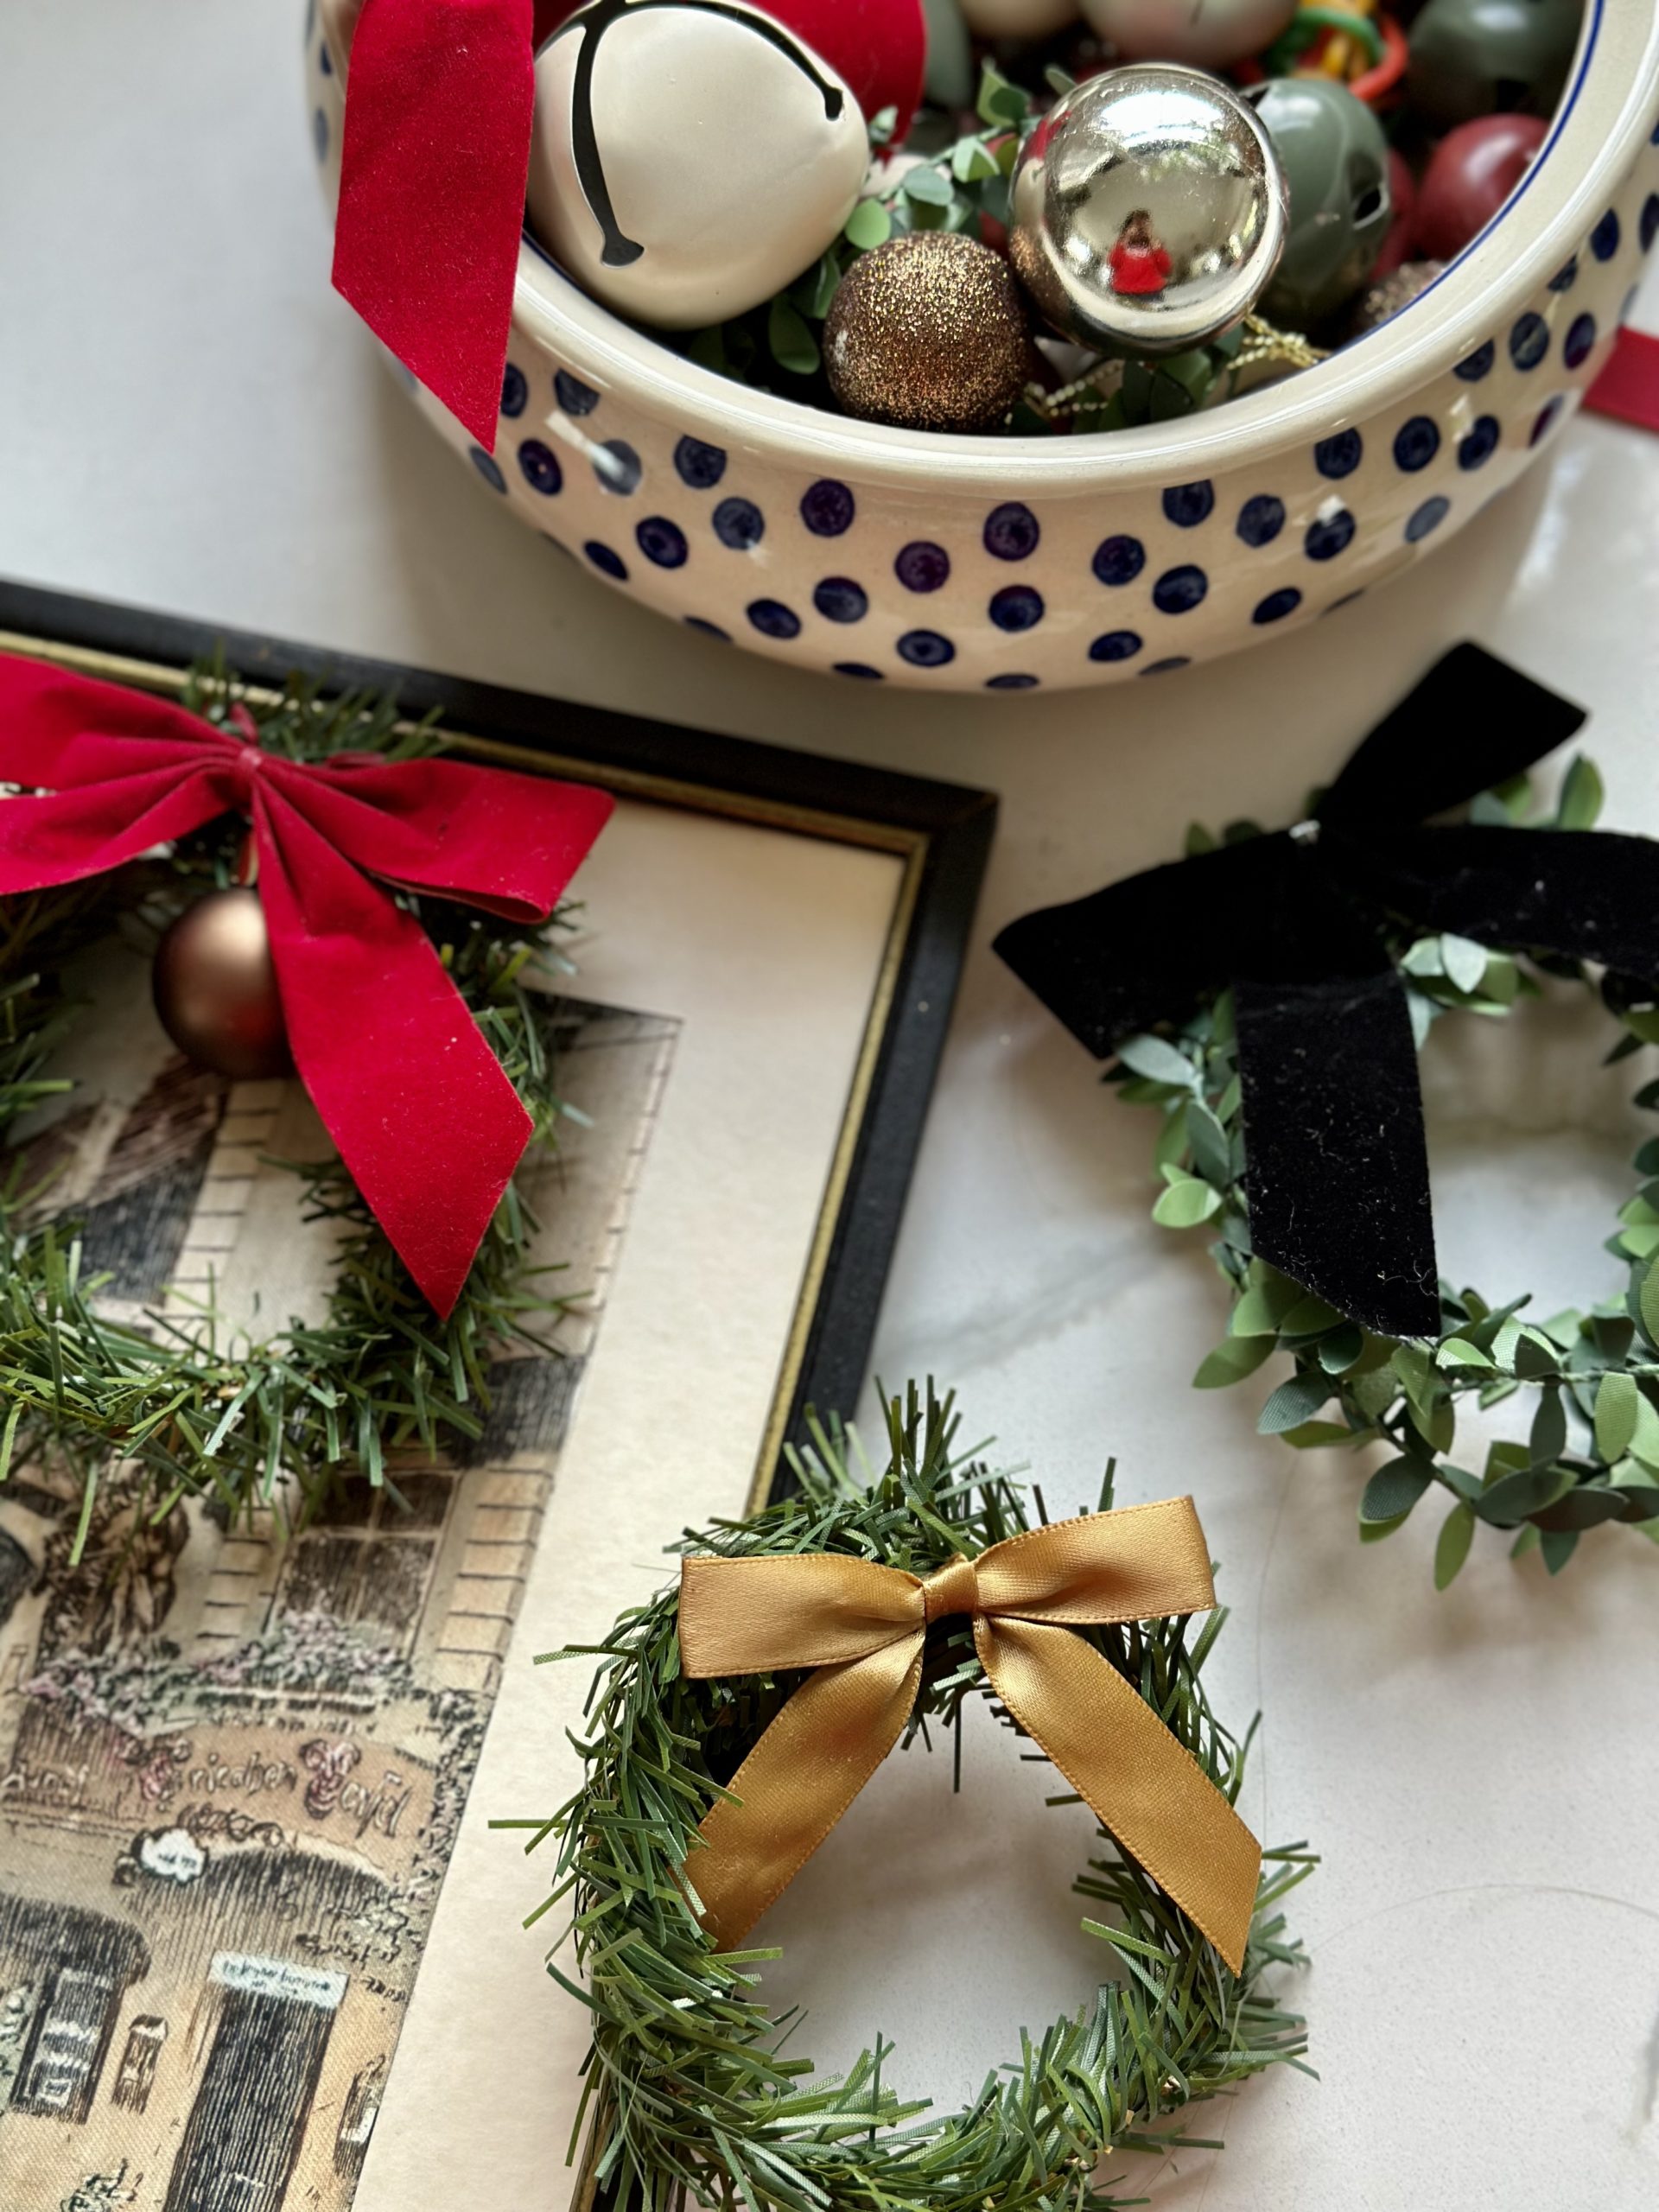 easy and budget friendly ways to decorate for christmas, decorating with bows, decorating art for christmas, christmas decor ideas, bows on frames, decorating art for christmas, mini wreath diy